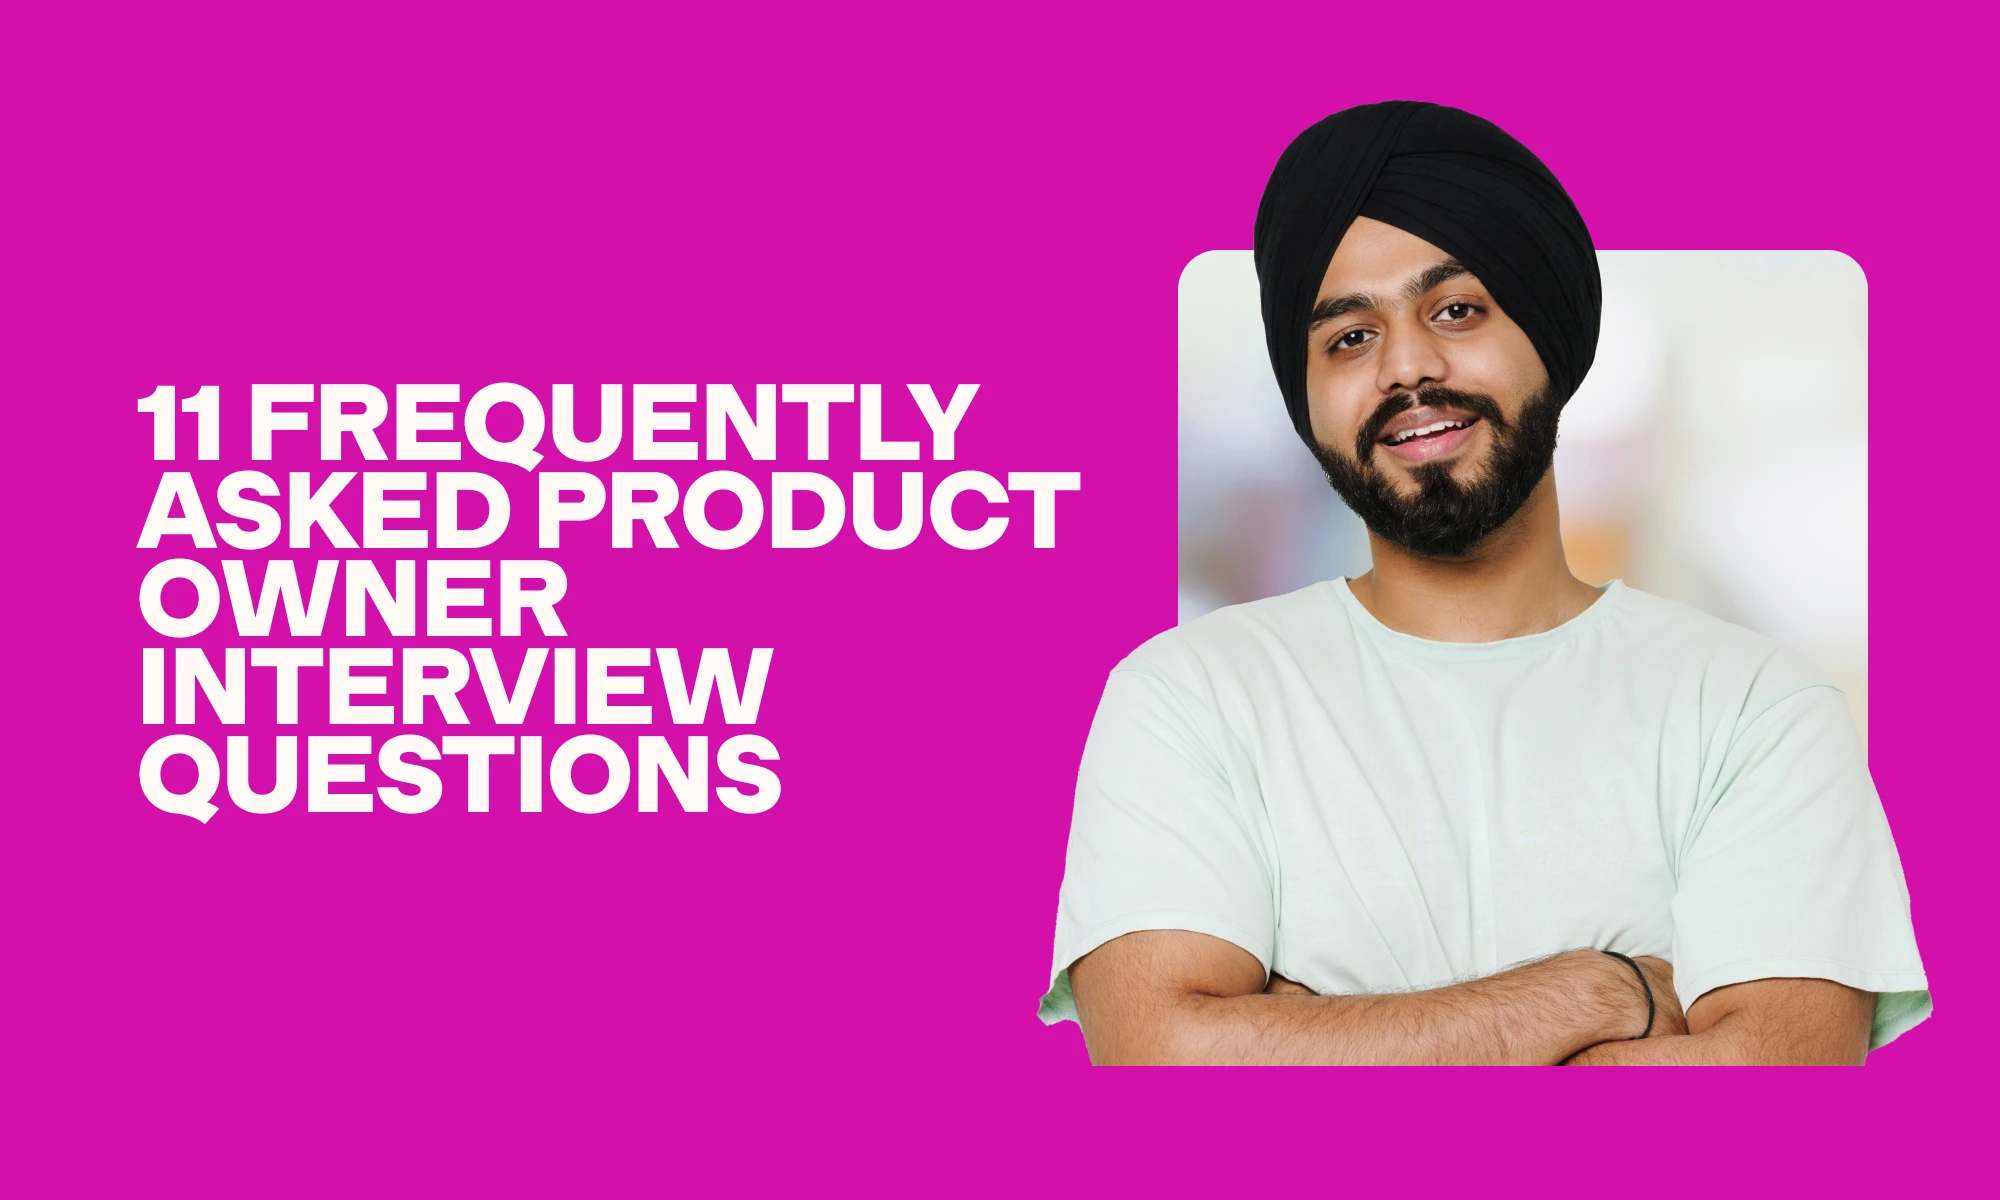 11 frequently asked product owner interview questions